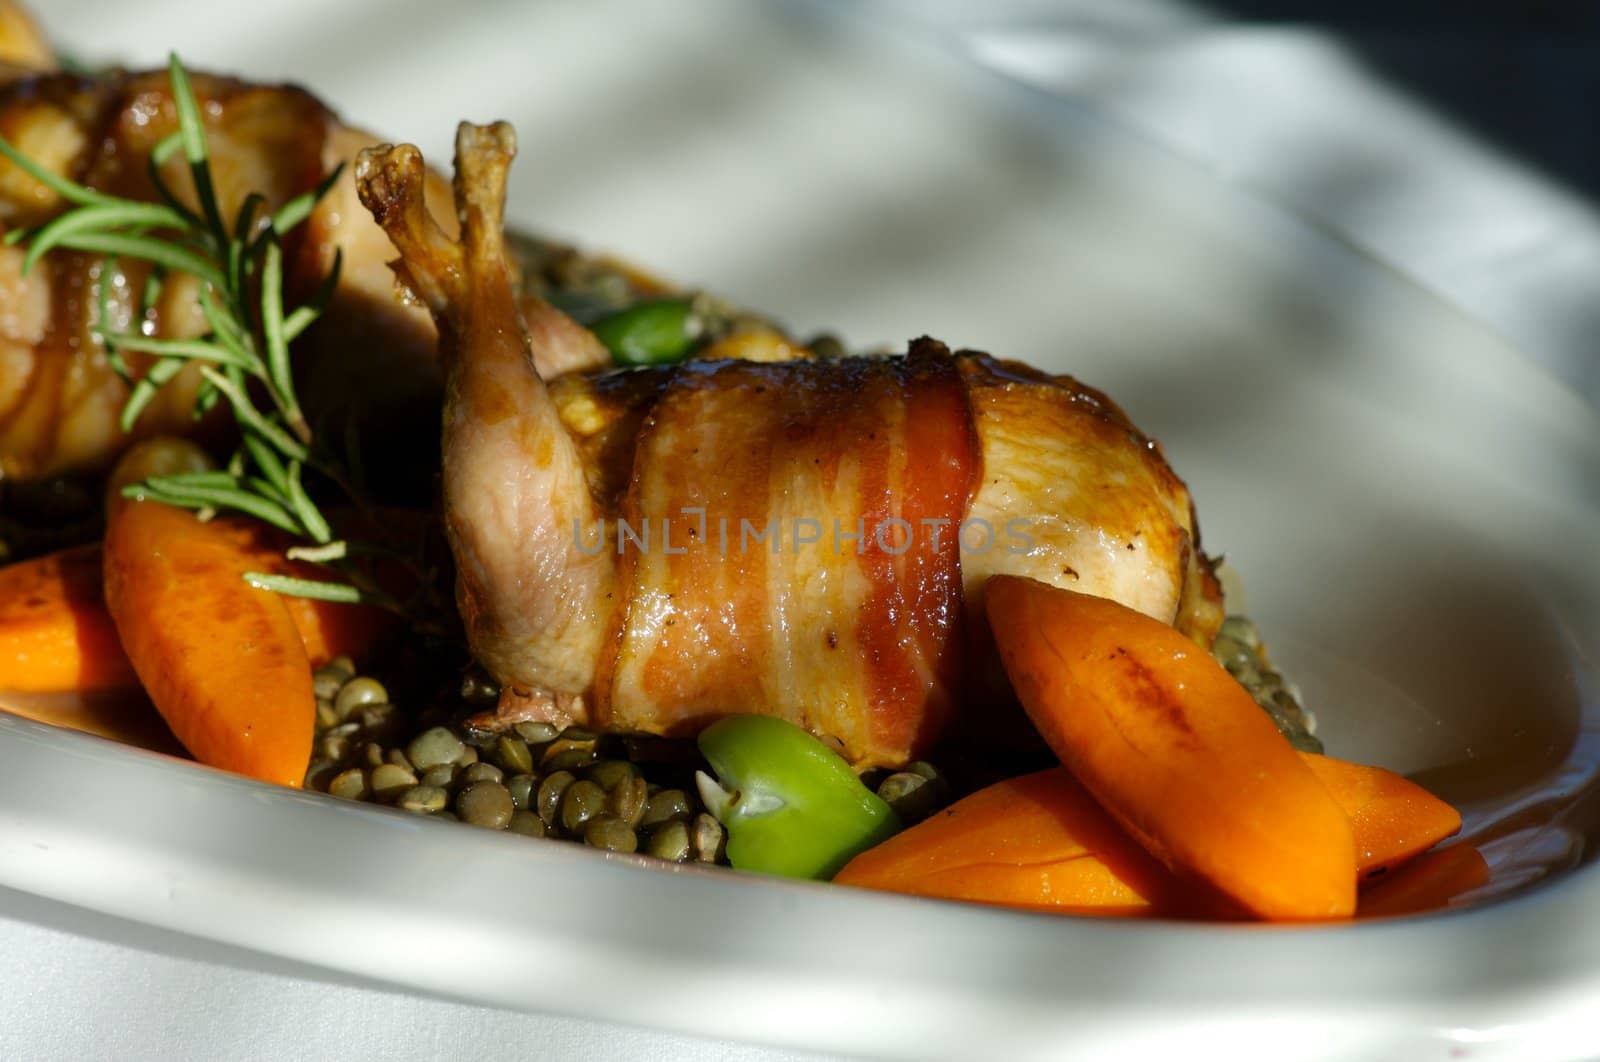 Image of bacon wrapped quail with vegetables